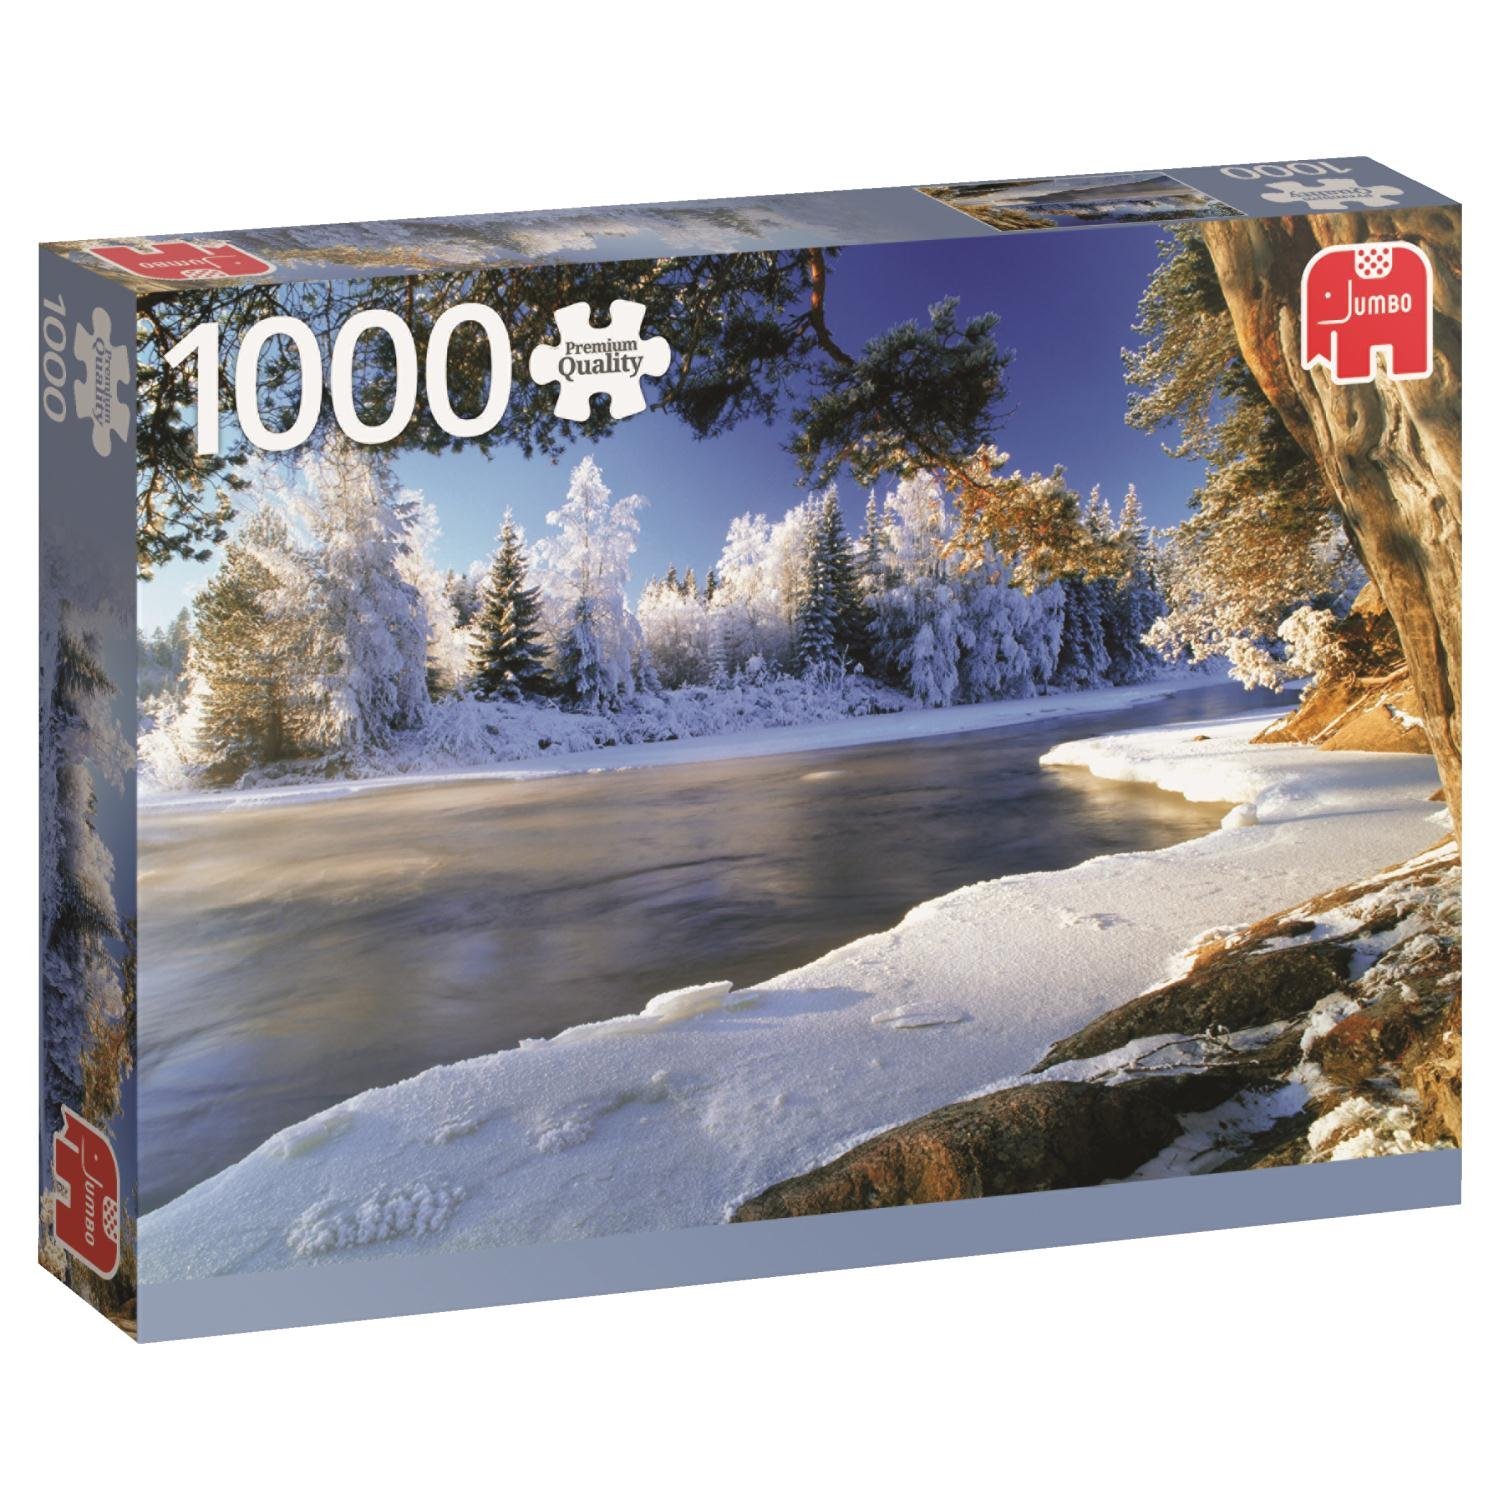  The River Dal, Sweden 1000 piece jigsaw puzzle